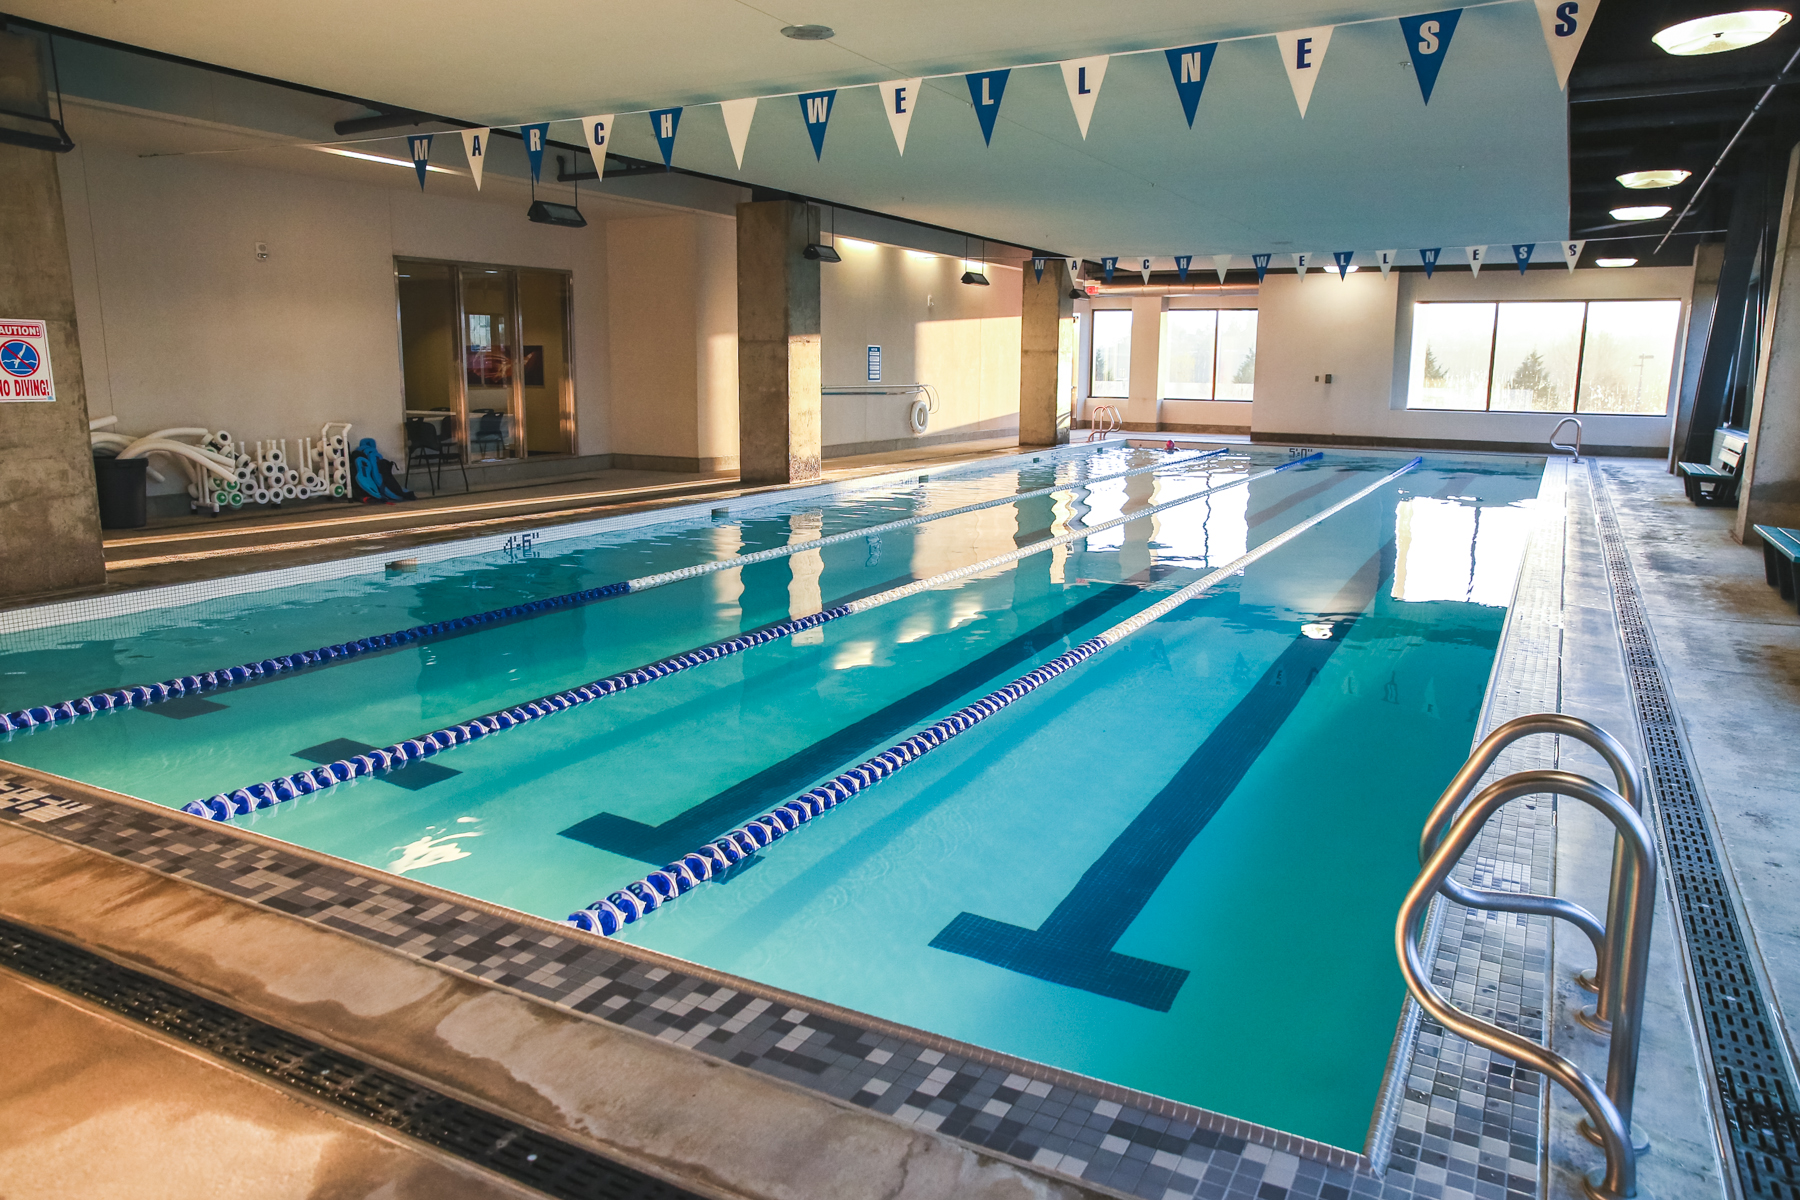 Wide view of march wellness four-lane lap swimming pool.